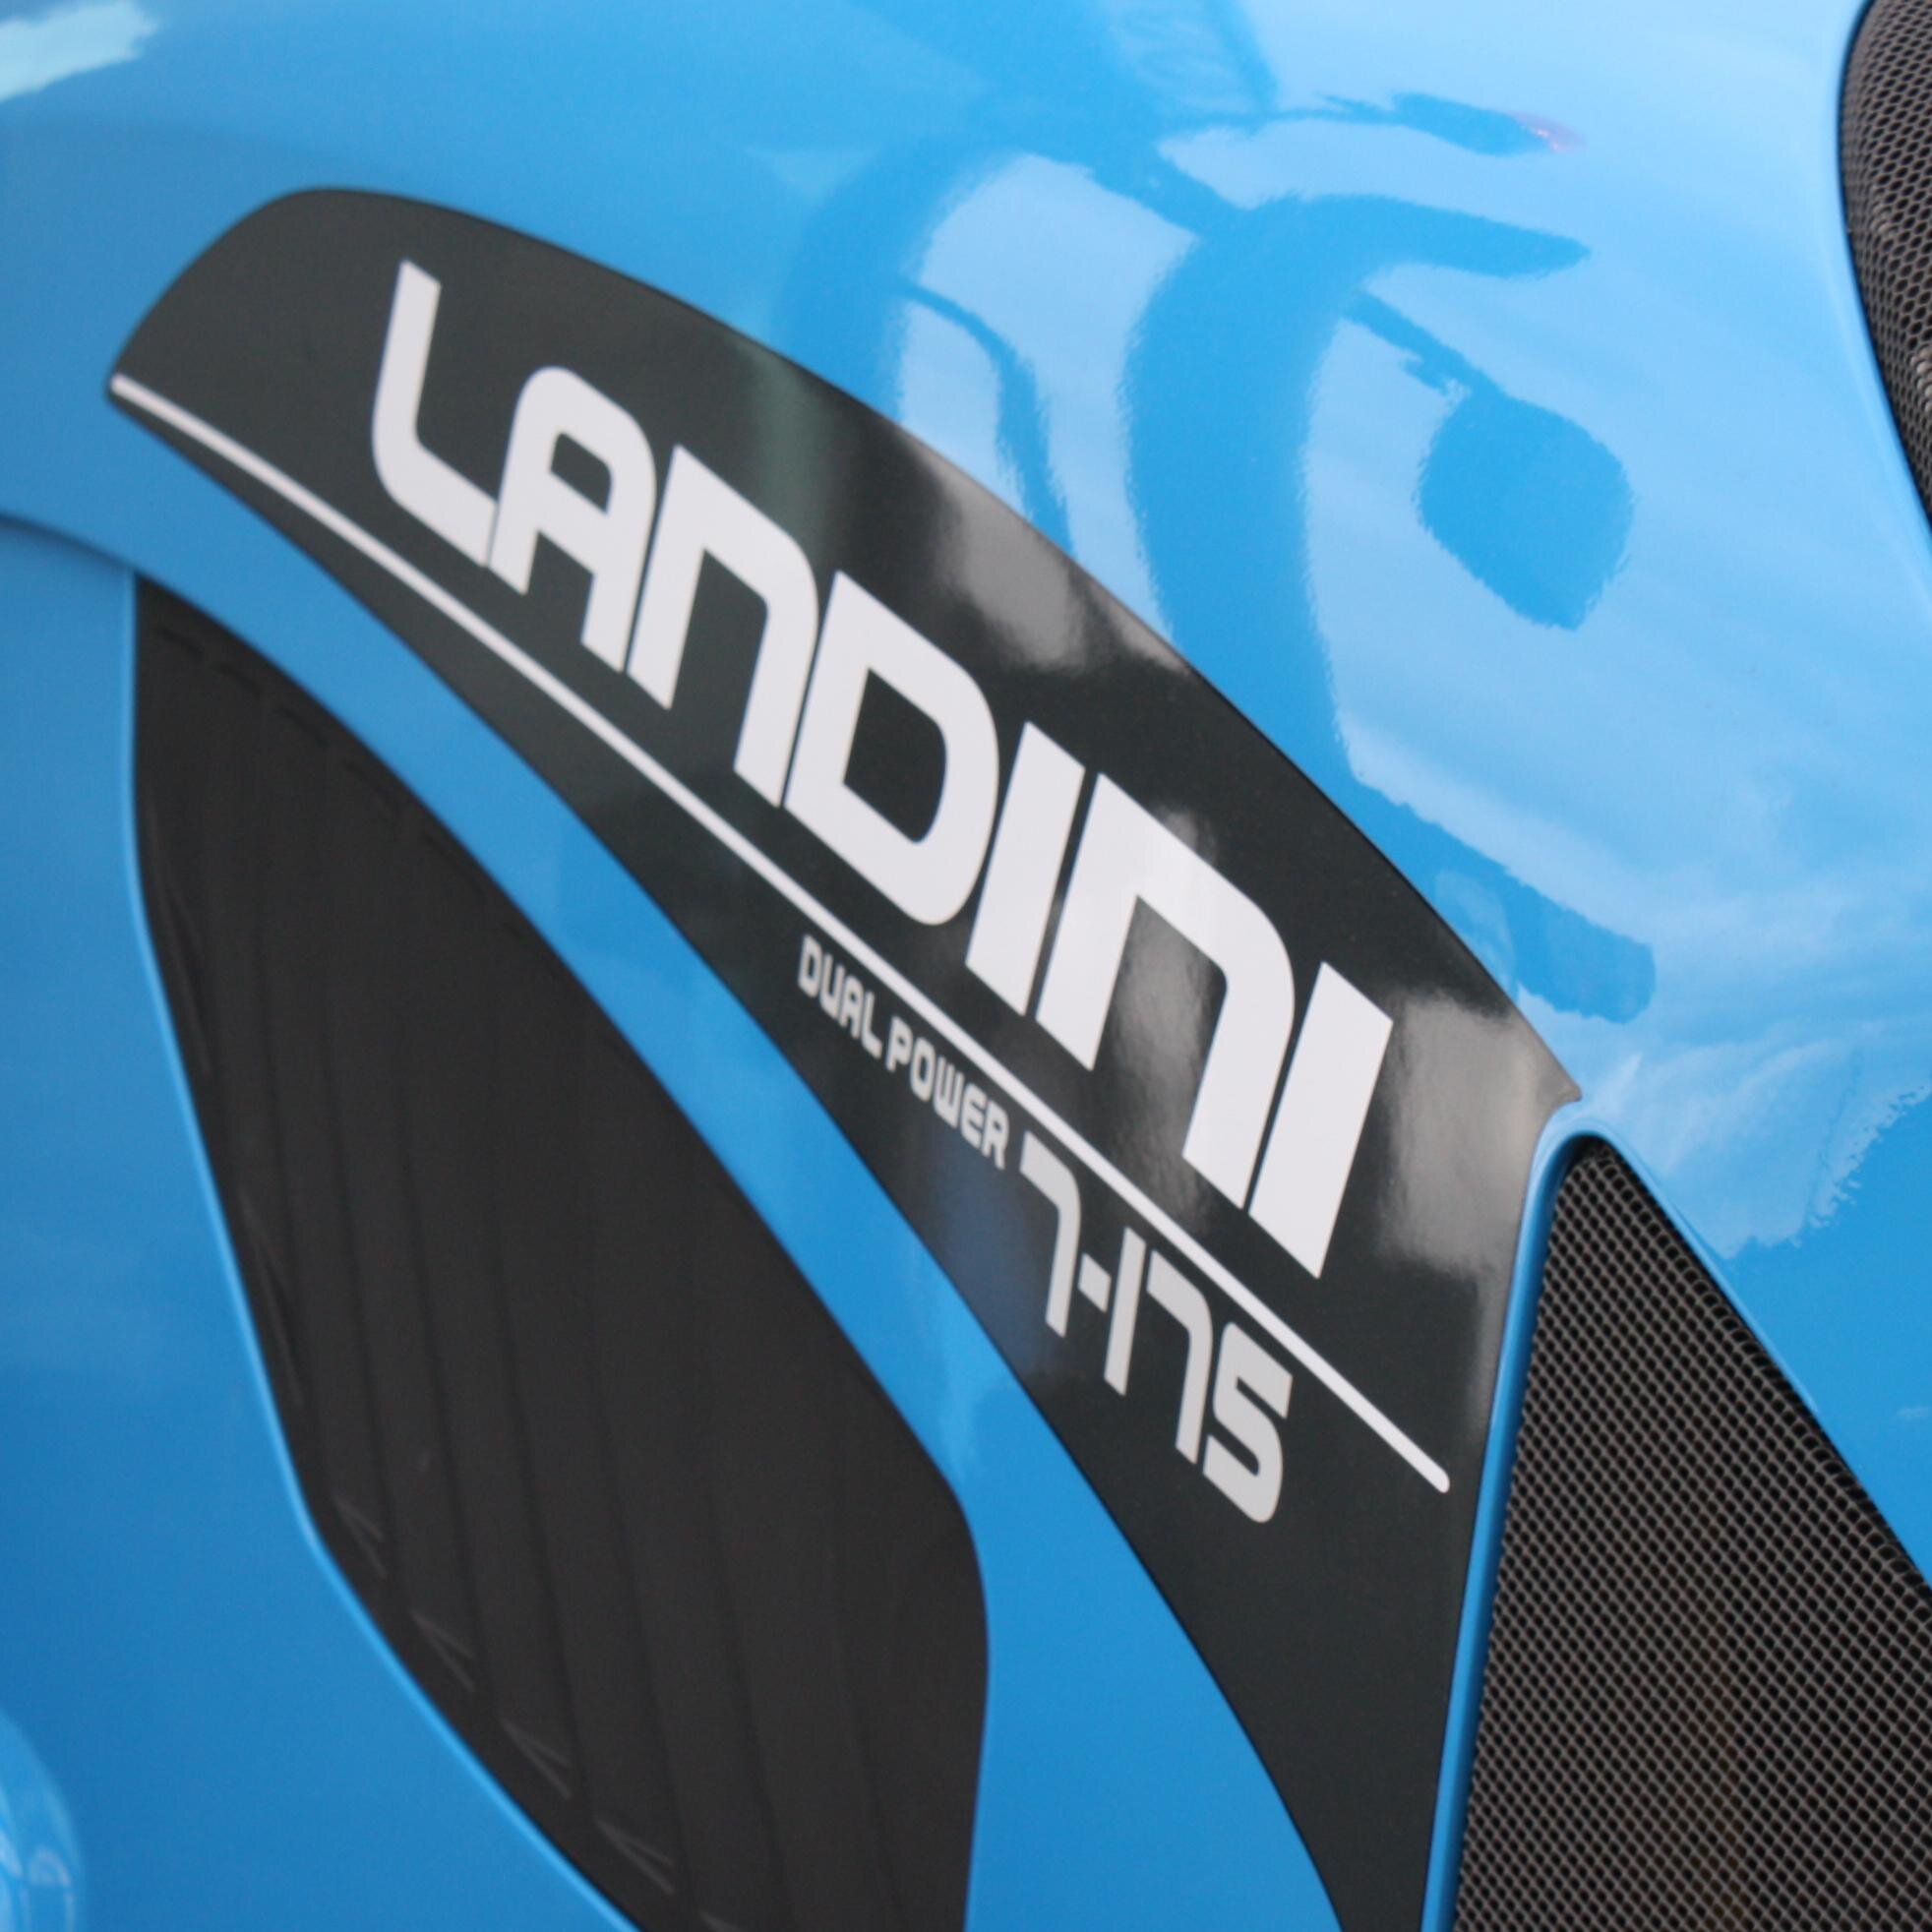 Importer & Distributor of Landini Tractors in Ireland. Landini has a long history in Ireland with its range of 4 & 6 cyl models. Order your 171 Landini today!!!